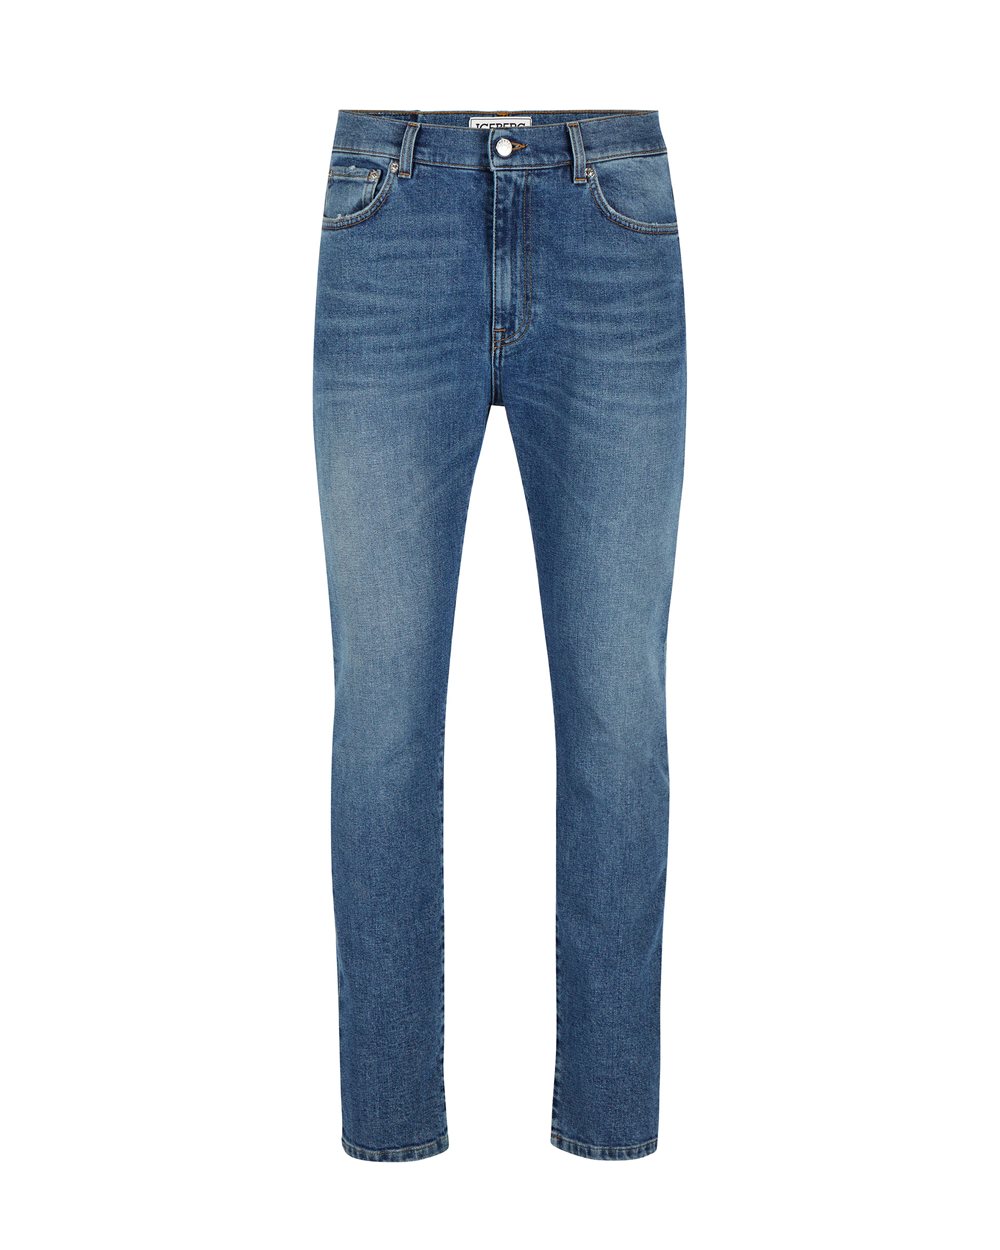 Faded 5-pocket blue jeans - TROUSERS AND JEANS | Iceberg - Official Website